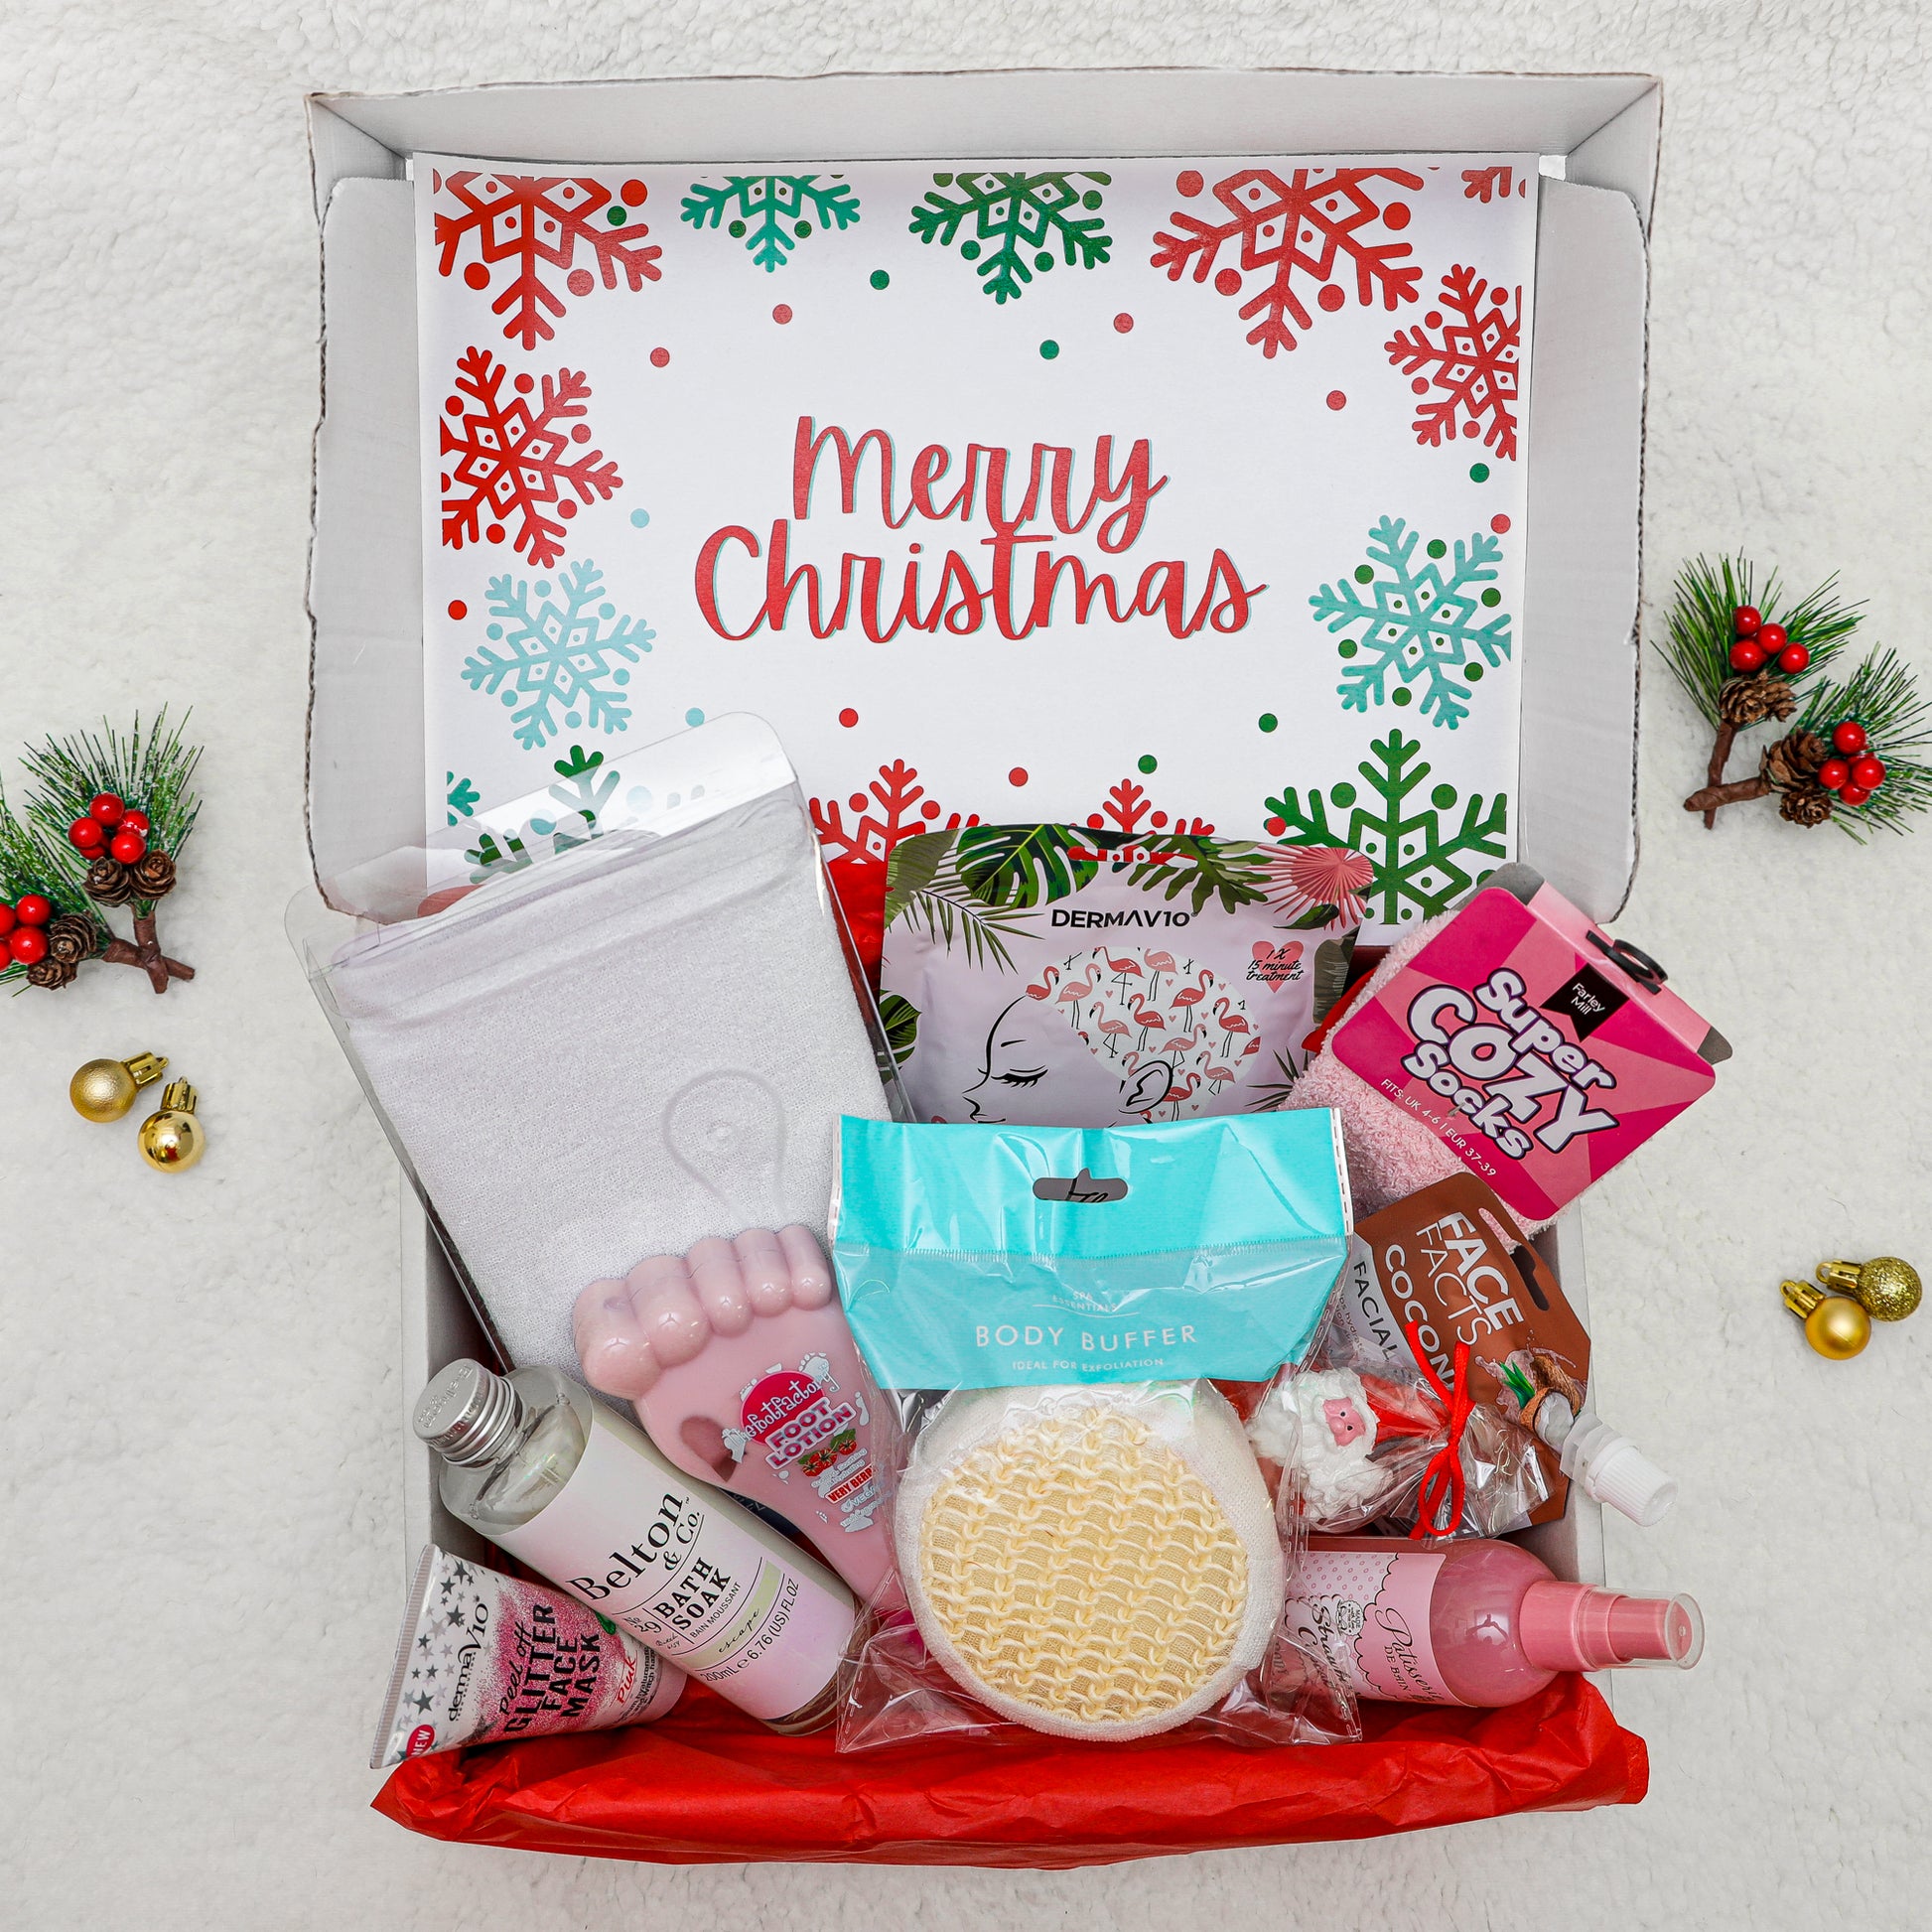 Christmas Spa Pamper Kit For Child, Teenager or Adult  - Always Looking Good -   